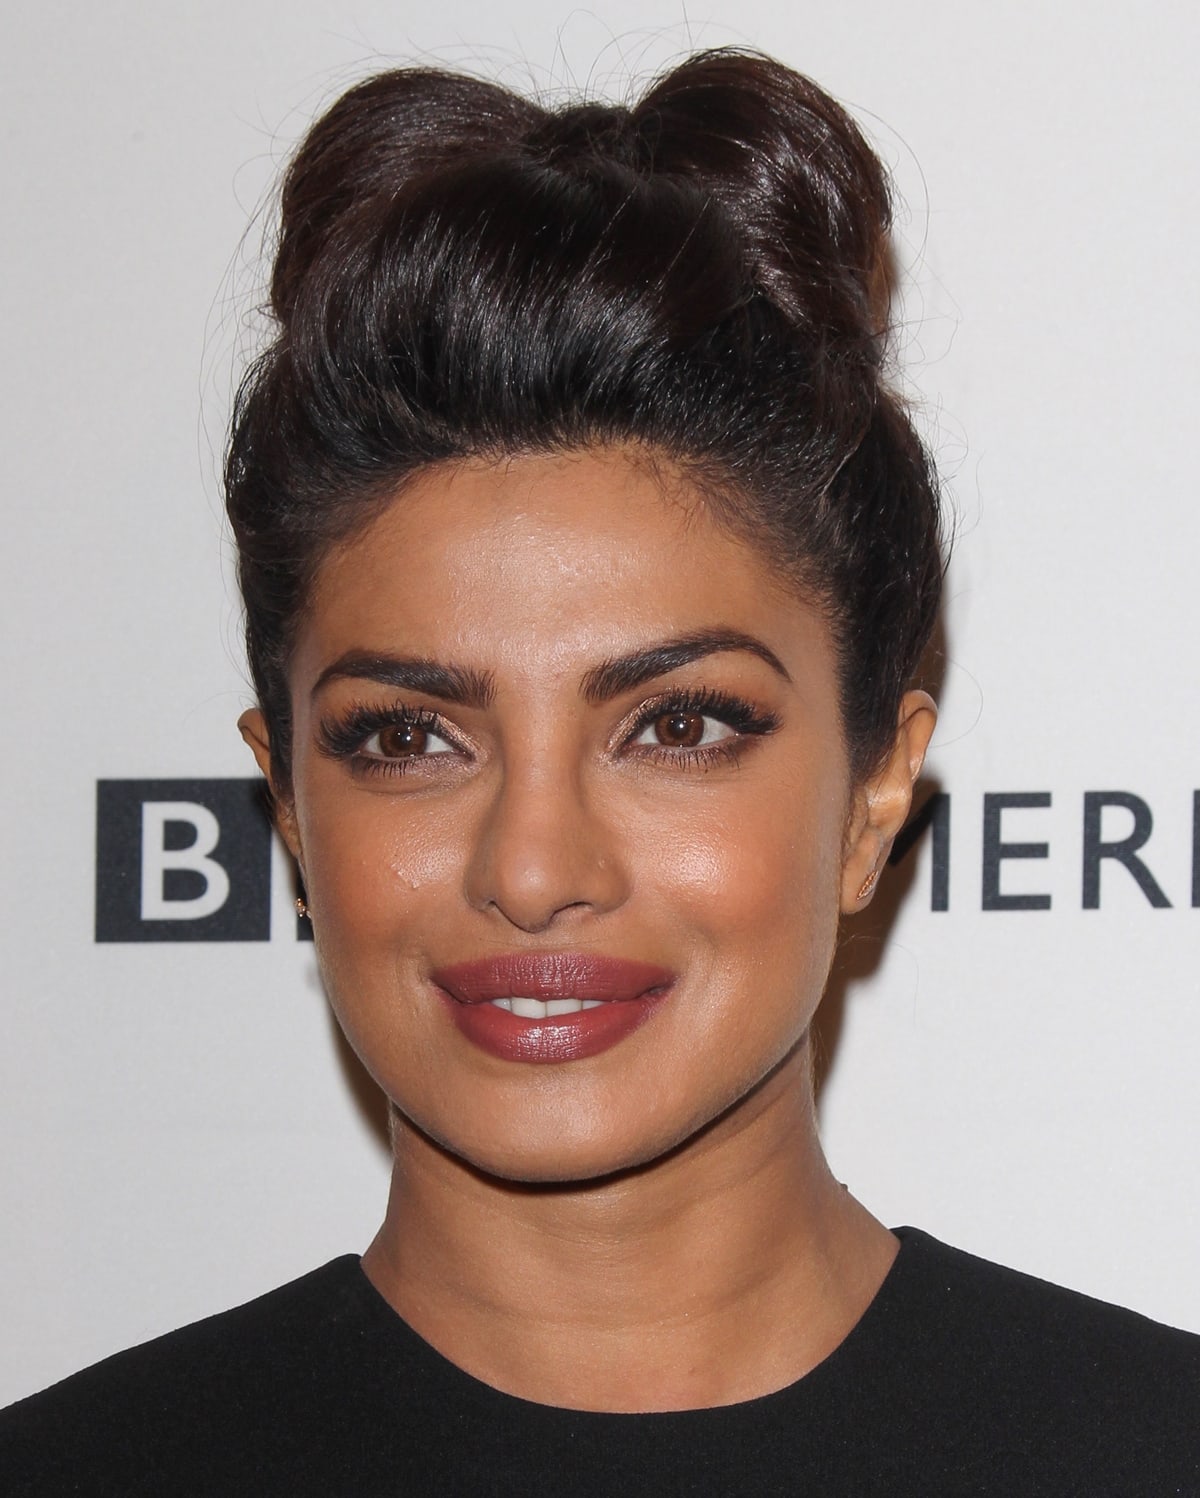 Priyanka Chopra Jonas opened up about her botched nose surgery and the pressures of being a woman in her New York Times bestselling book, “Unfinished: A Memoir”